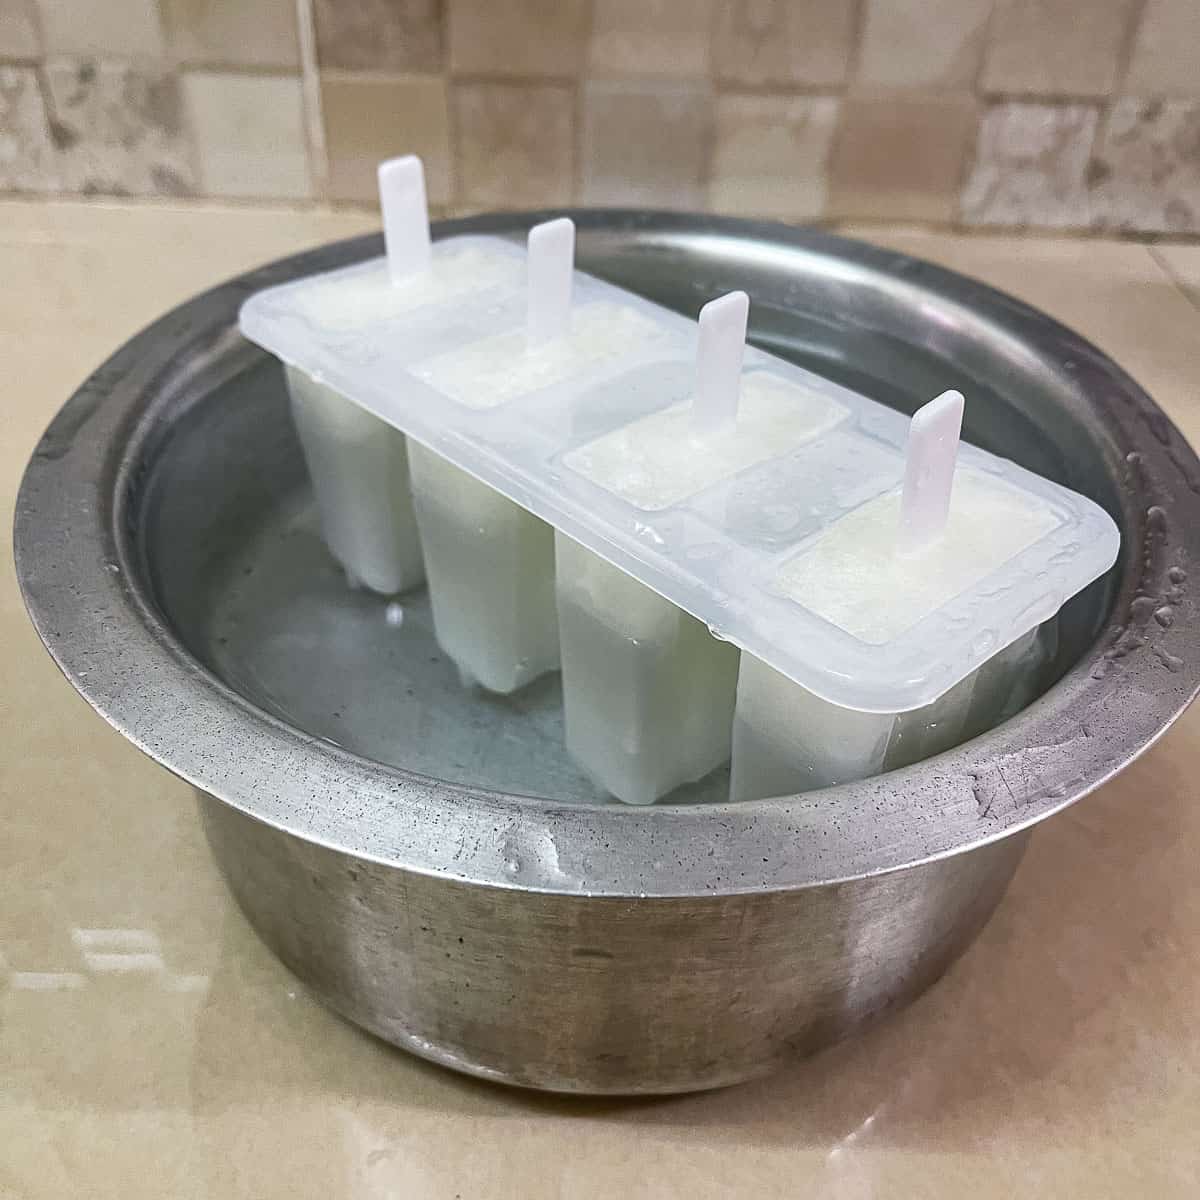 A popsicle mold in a pot of water